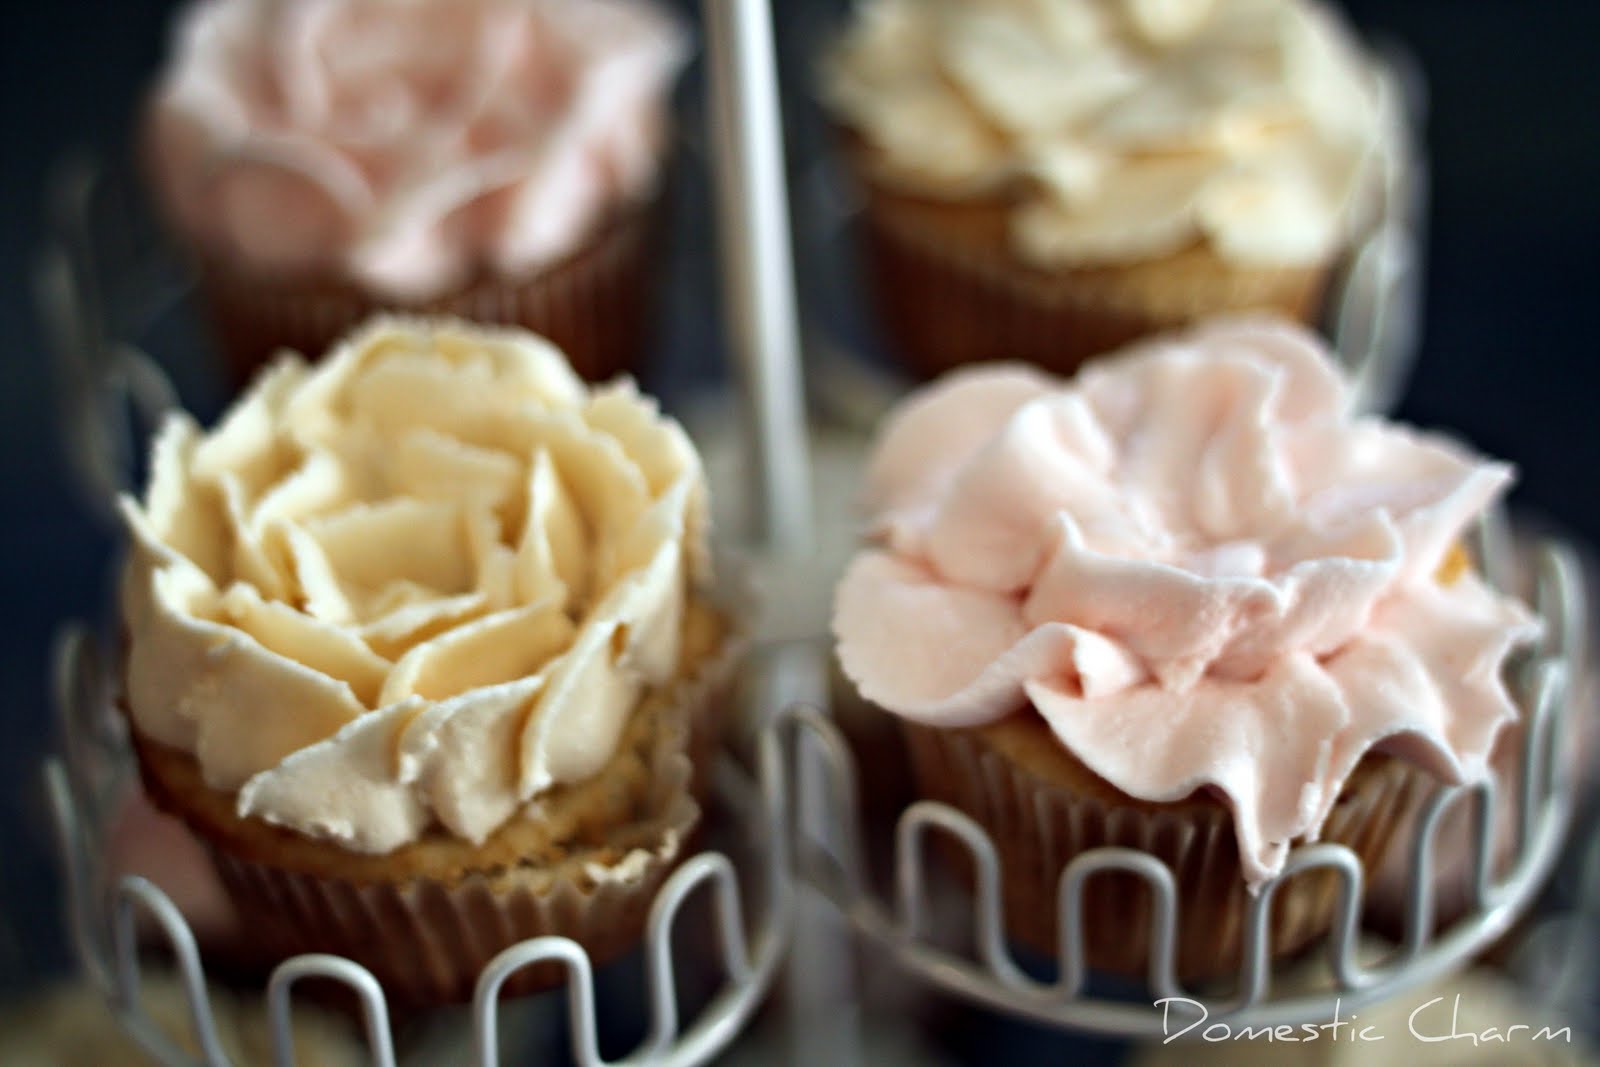 did cupcakes how on my to flowers make like make picture look them the here I best and just , to buttercream